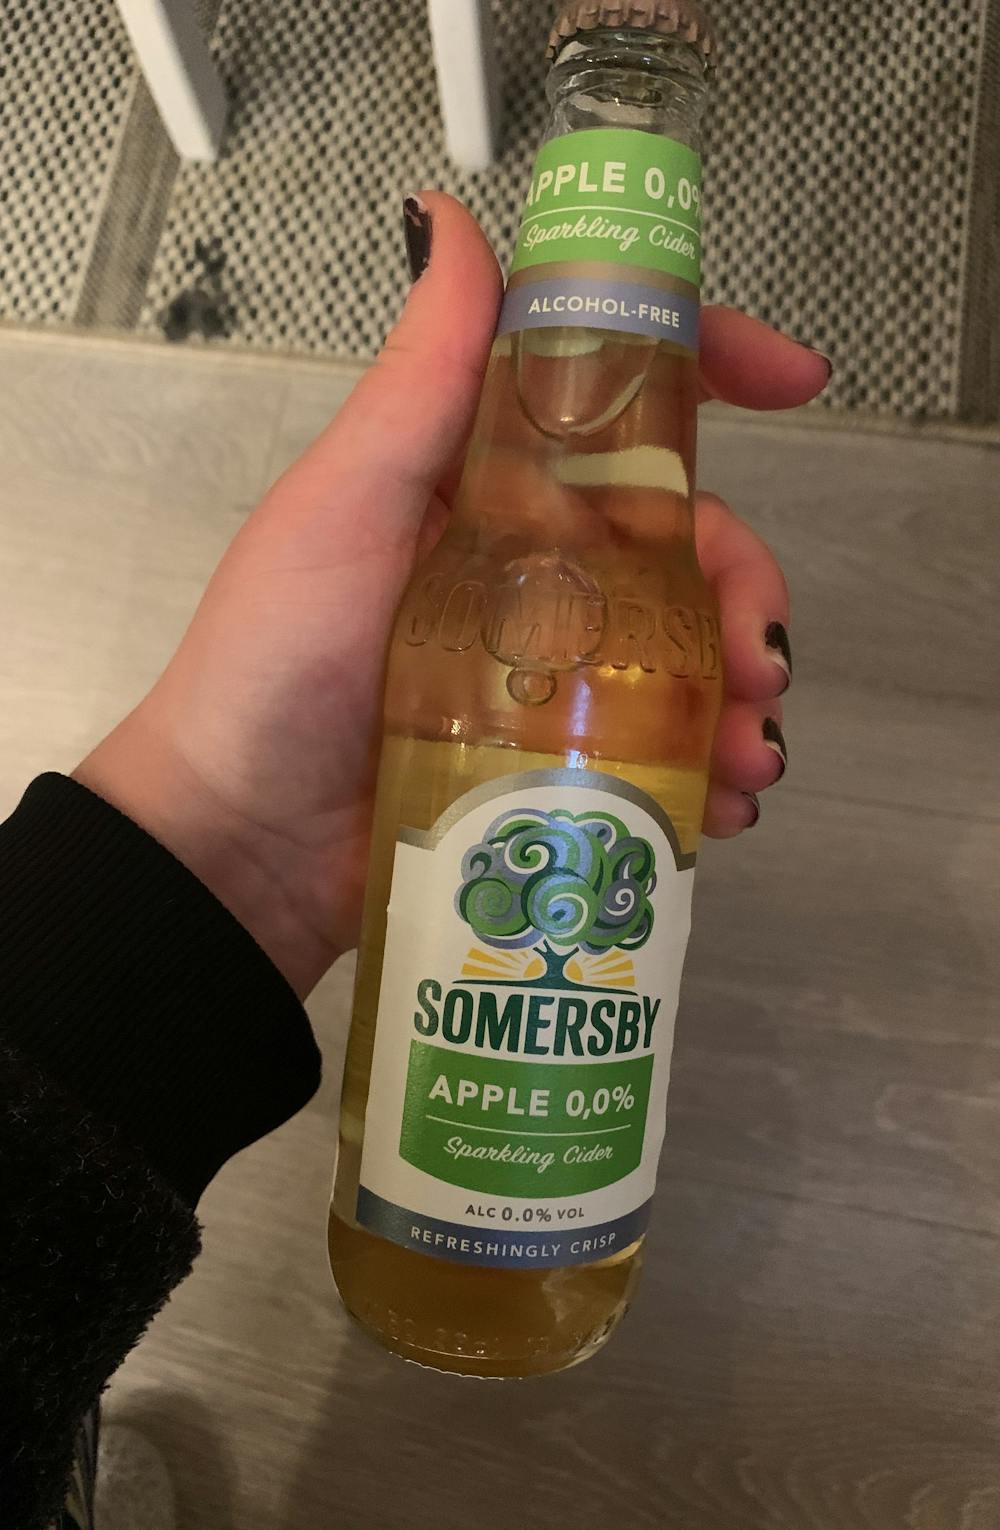 Apple 0,0%, Somersby